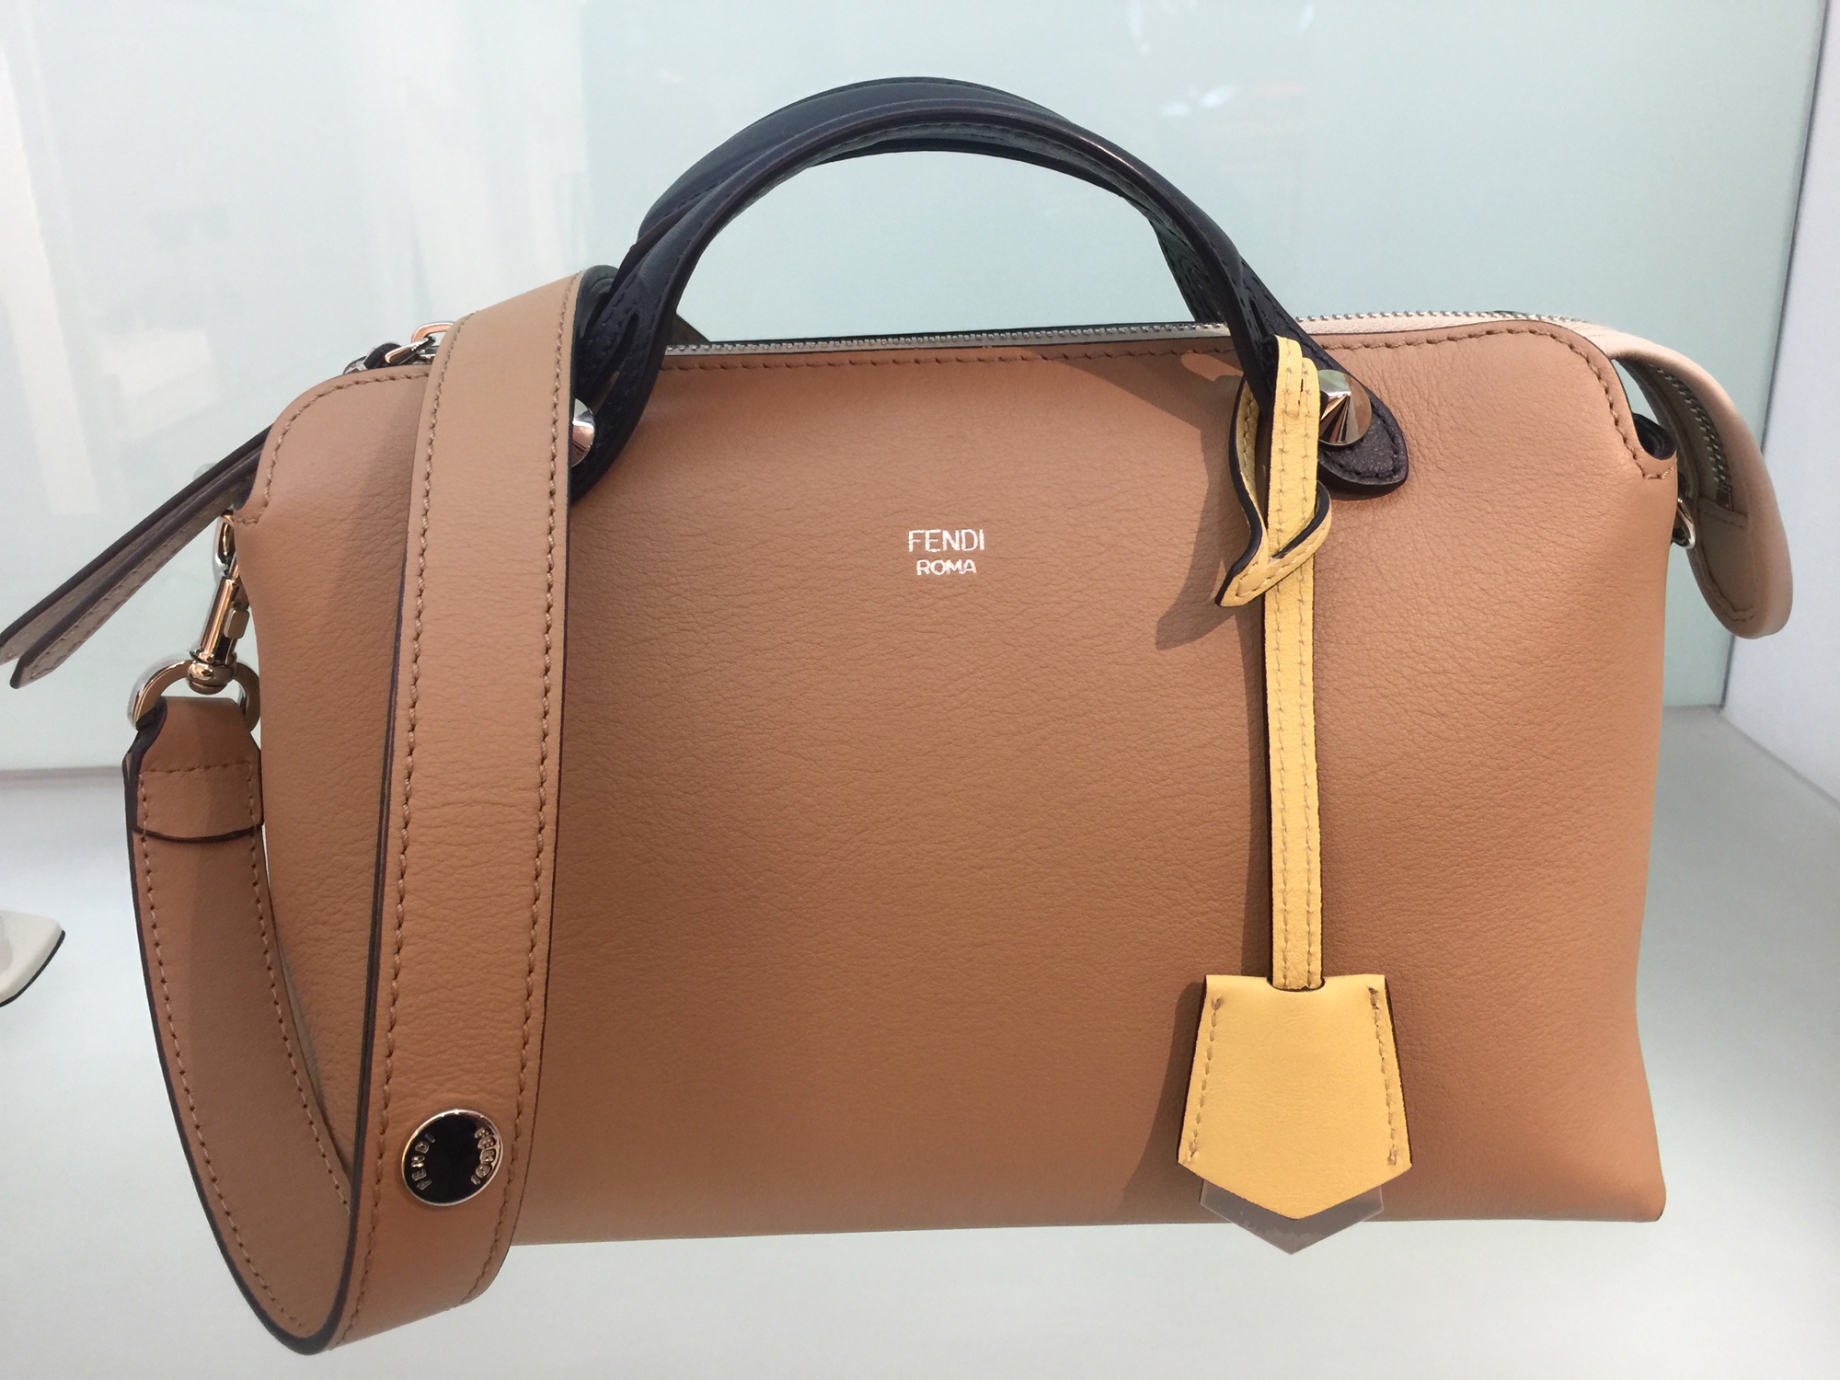 Fendi Mini Baguette Review and What's in My Bag 